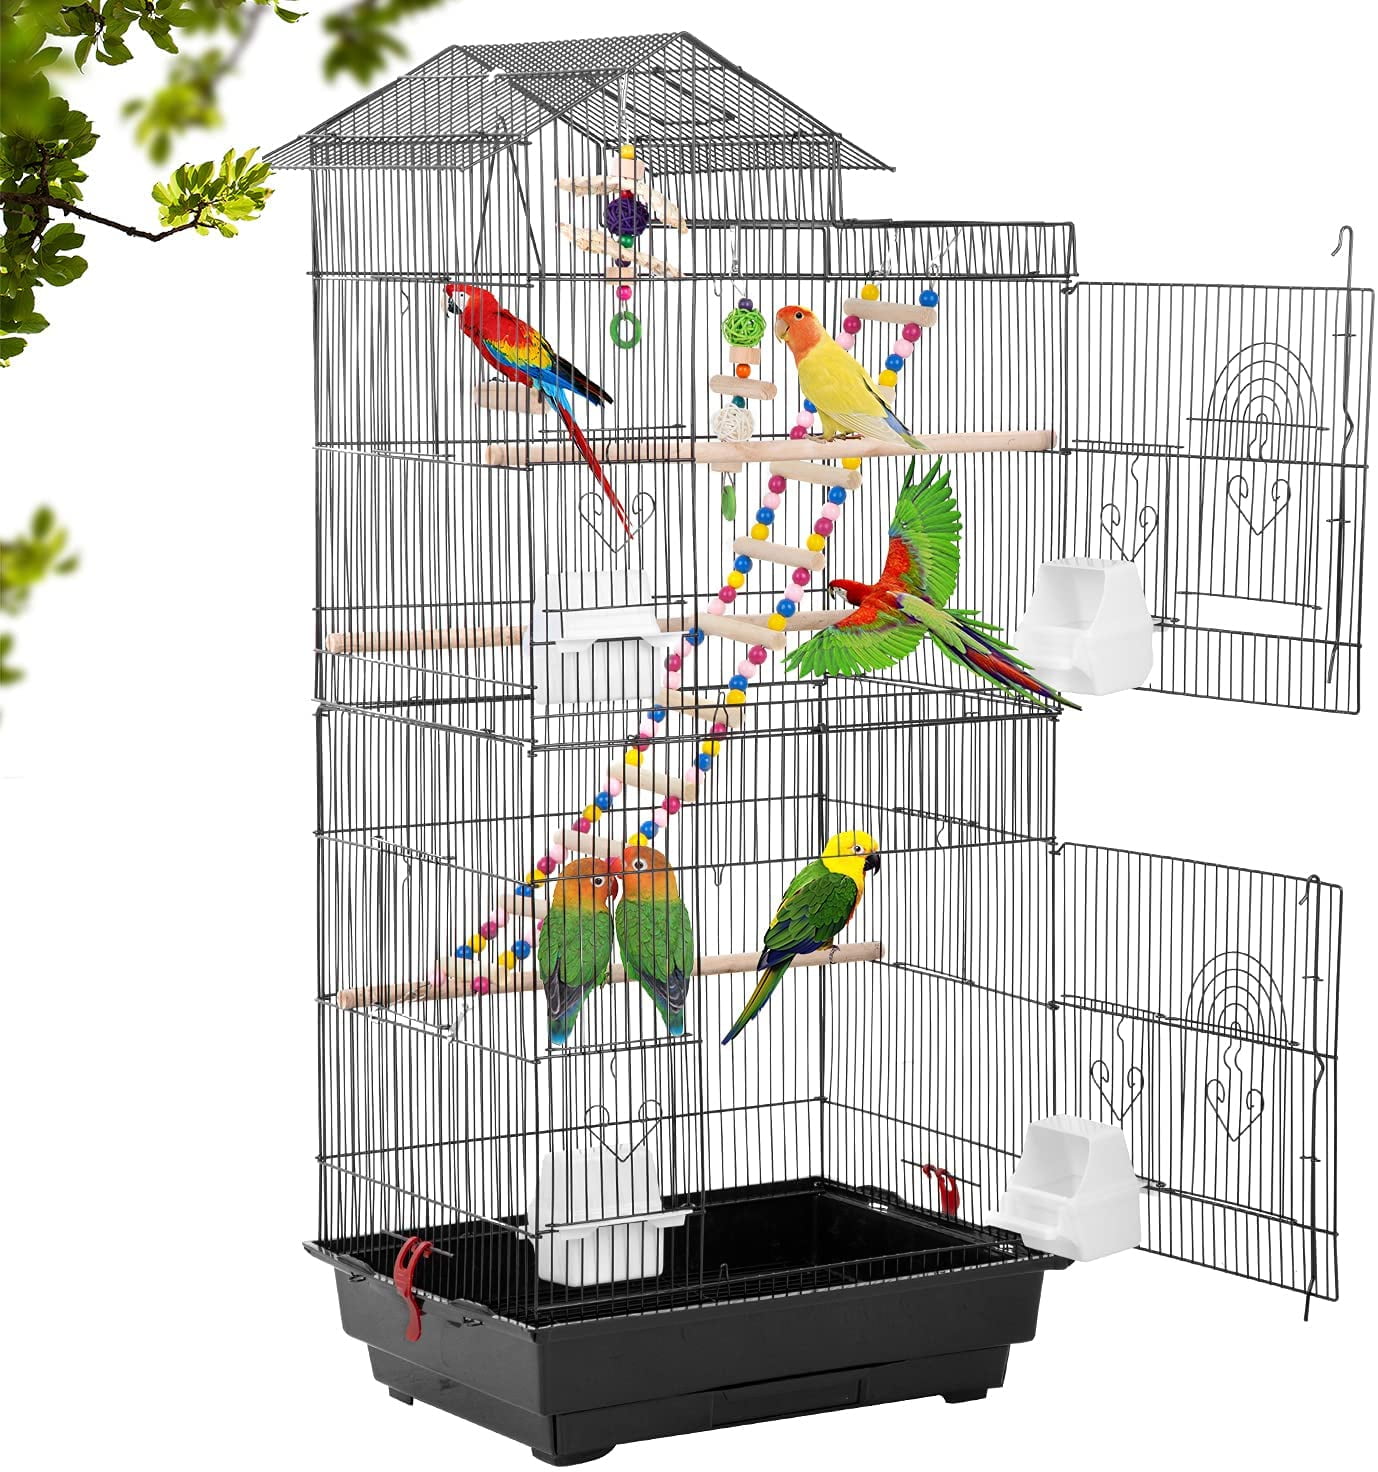 37" 57" 39" 63" 68"Small Large Bird Cage Play Parrot Cage And Cup Food 7 Style 